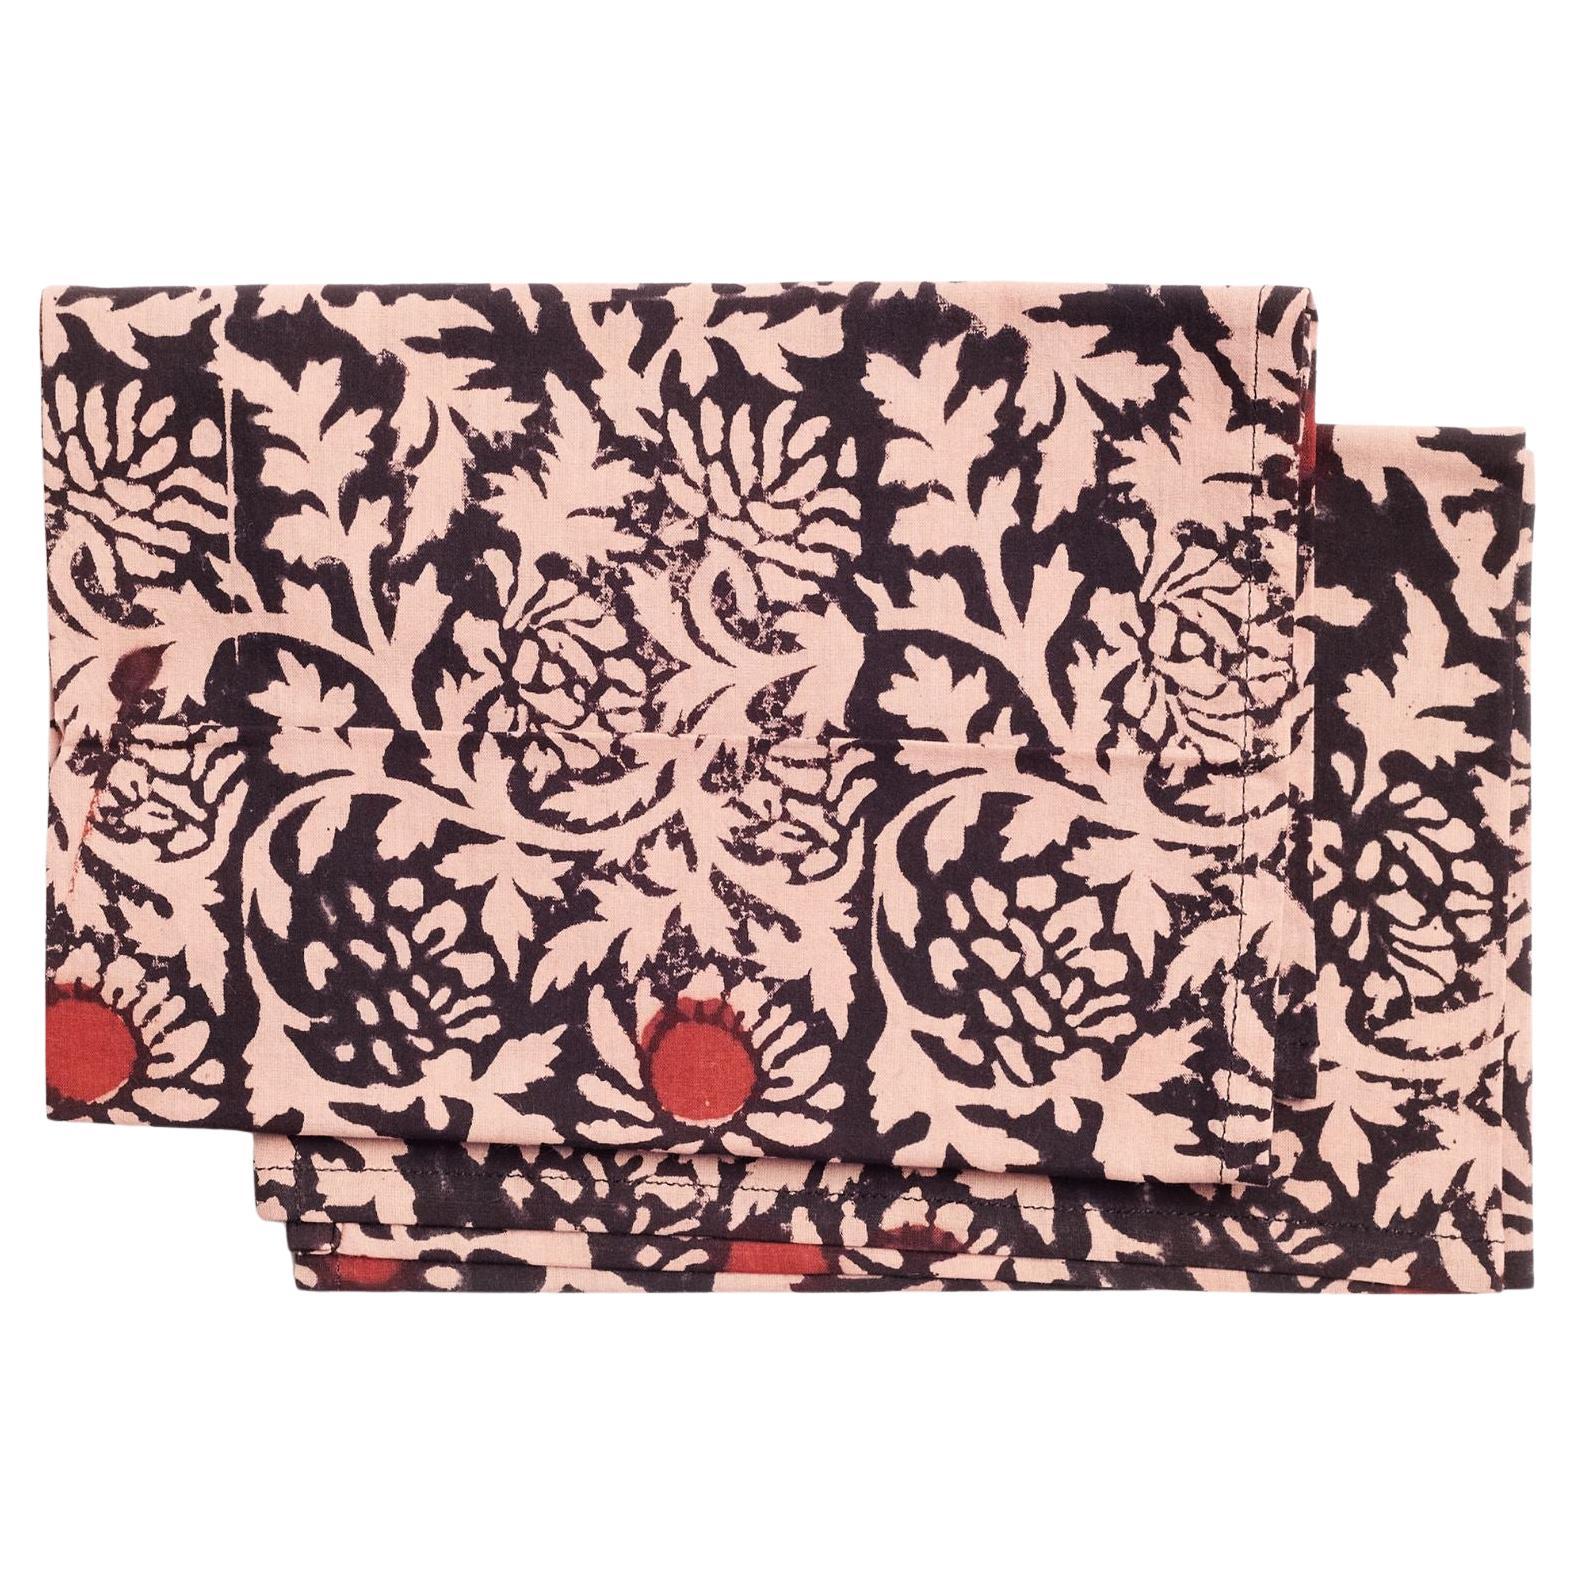 Hummus Floral Cotton Table Napkin, Handcrafted By Artisans ( set of 4 Napkin ) 